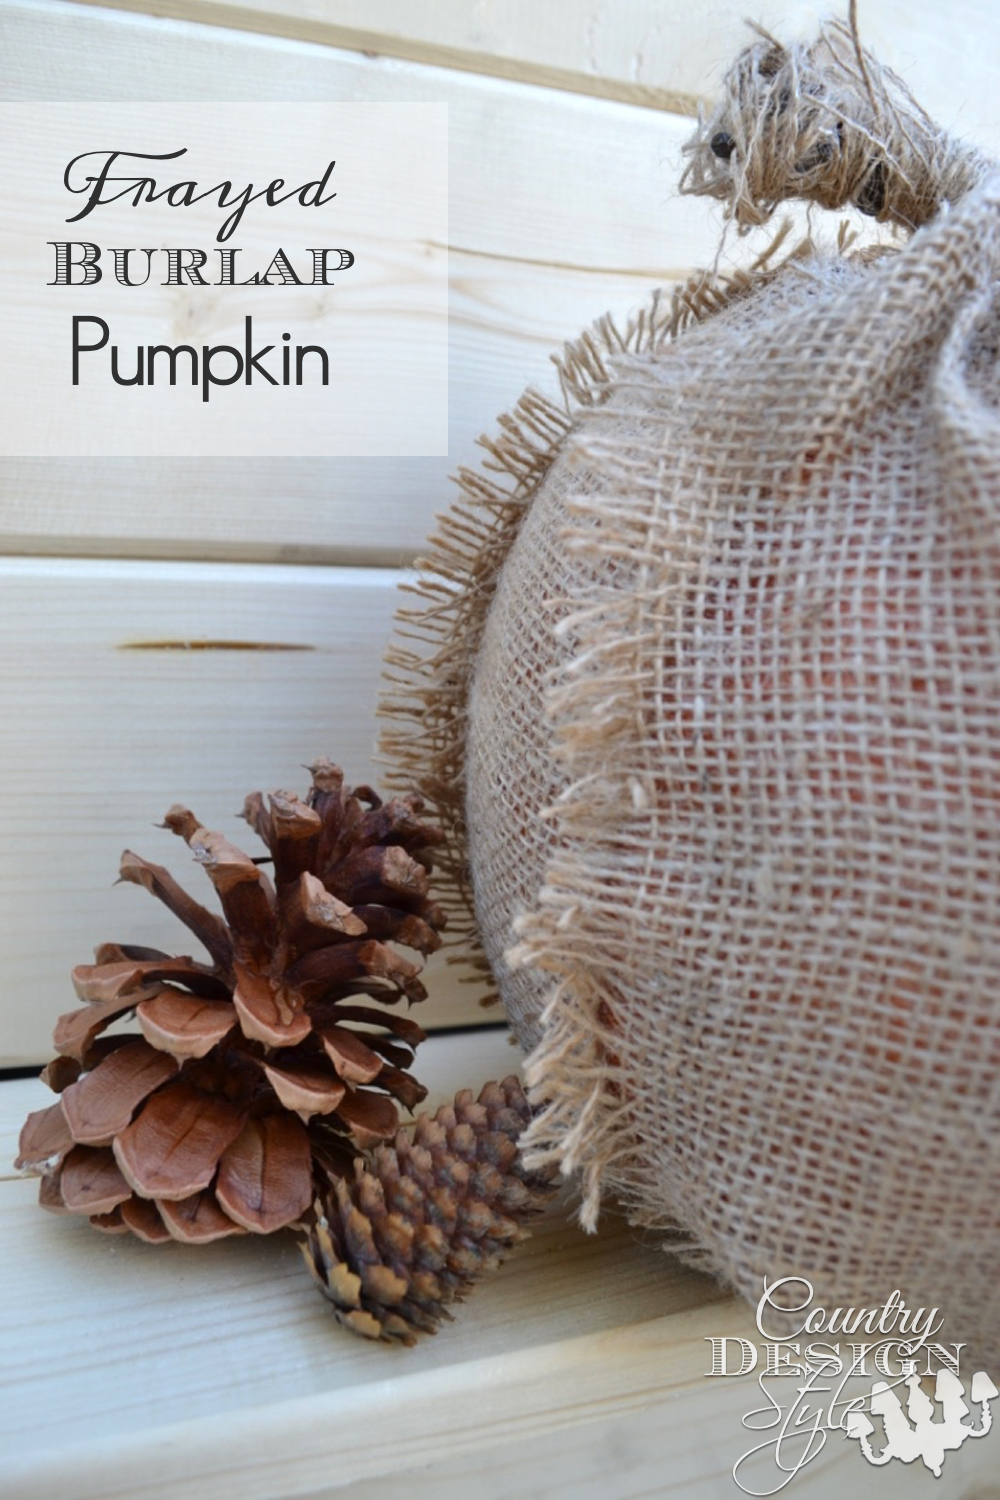 Do you enjoy adding burlap to your fall decorating? Here's an easy autumn burlap pumpkin to DIY on any budget. Easy enough to make a pumpkin patch! Country Design Style www.countrydesignstyle.com